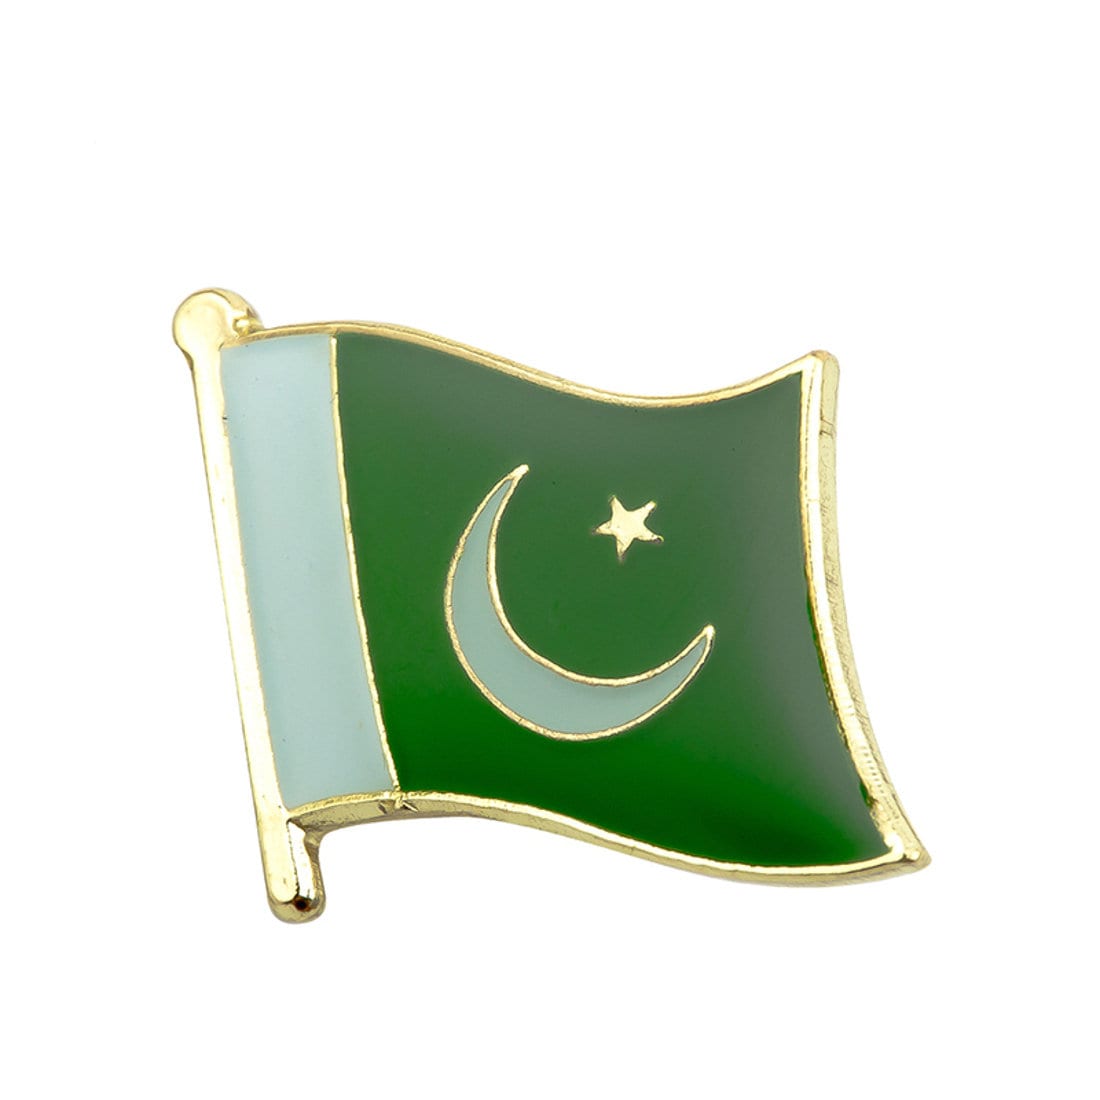 Pin on Gifts to Pakistan